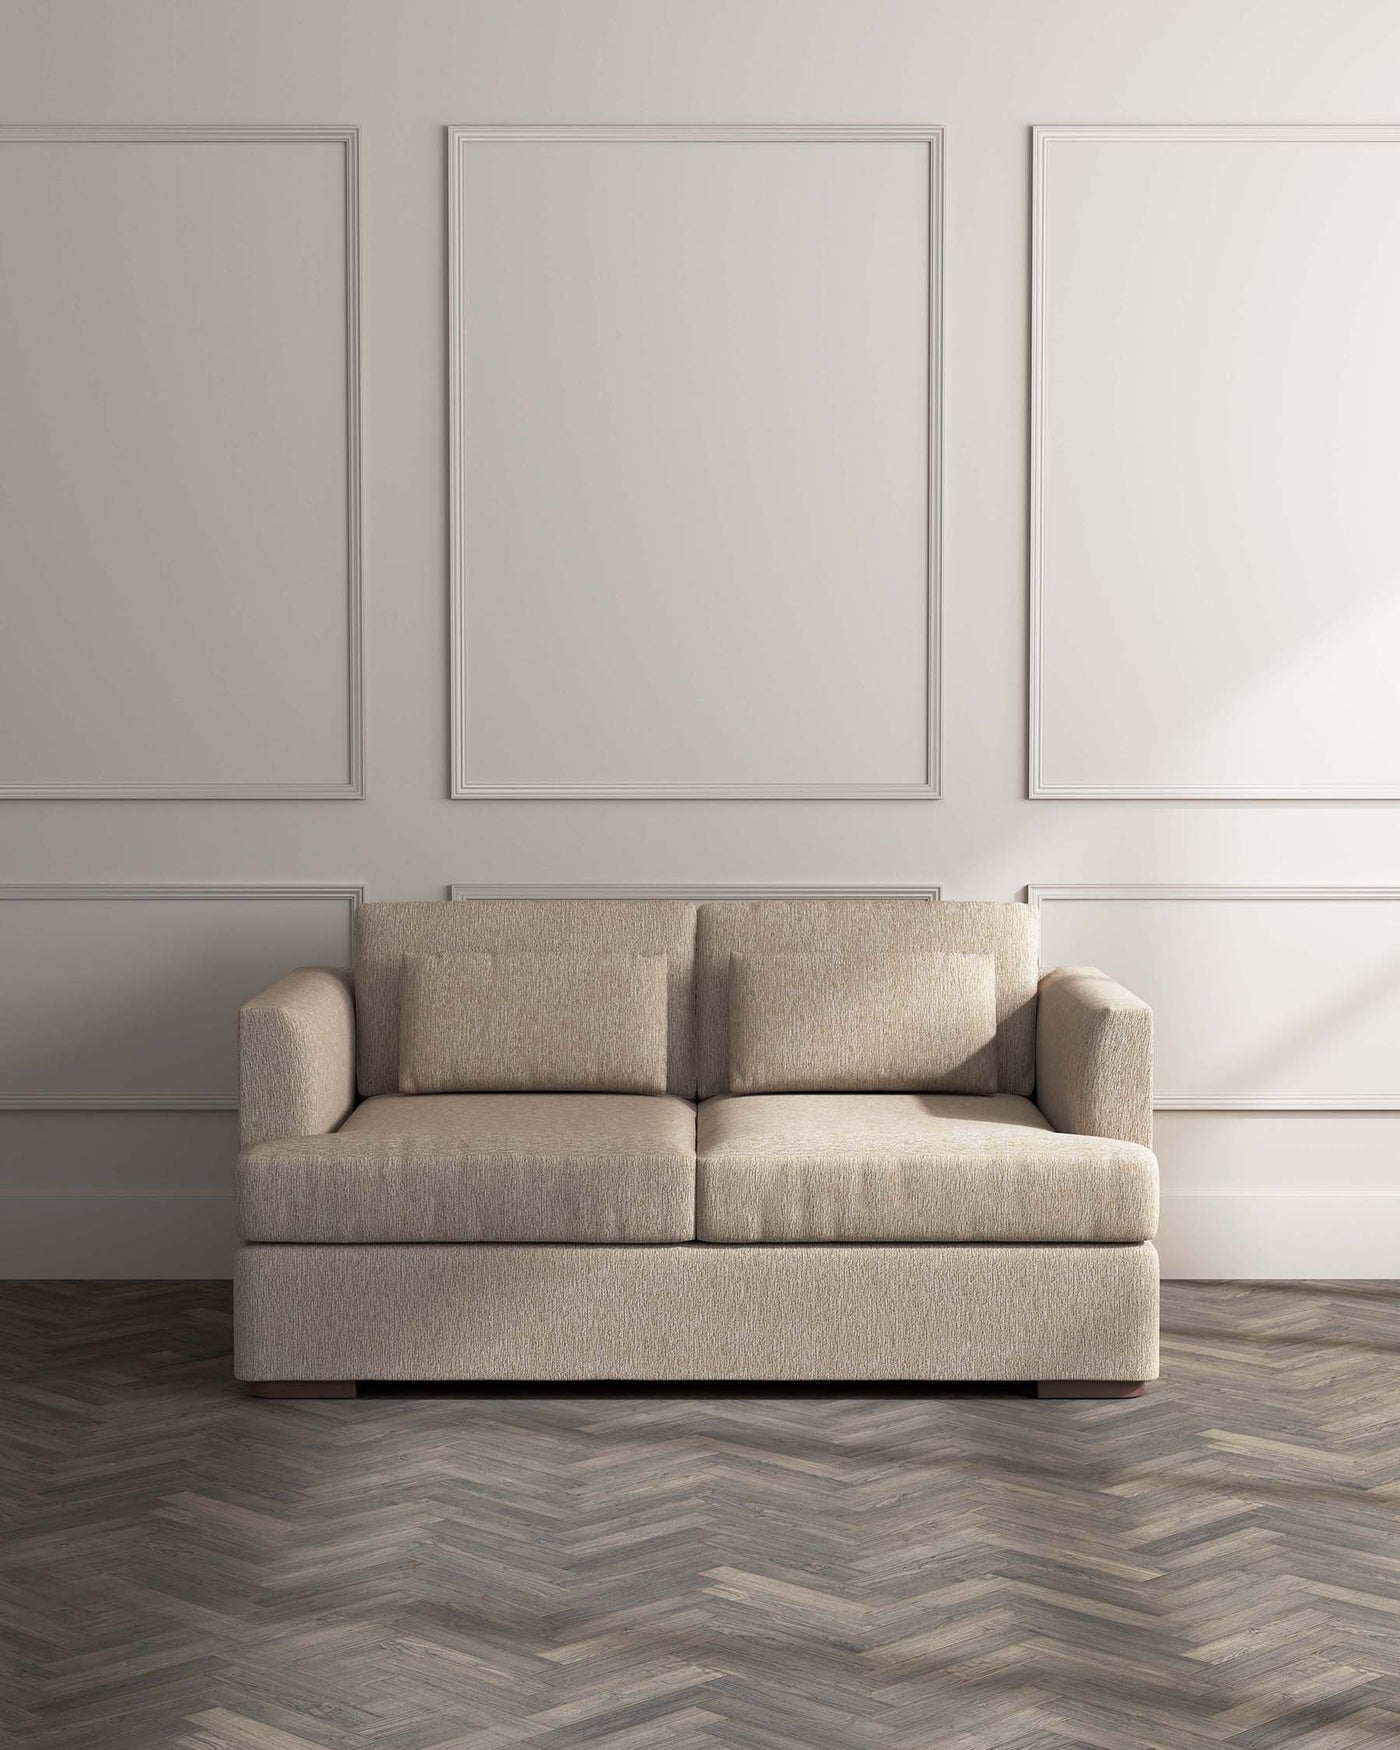 Modern beige three-seater sofa with clean lines and soft textured upholstery, positioned on herringbone parquet flooring against a wall with understated wainscoting and two framed decorative panels above.